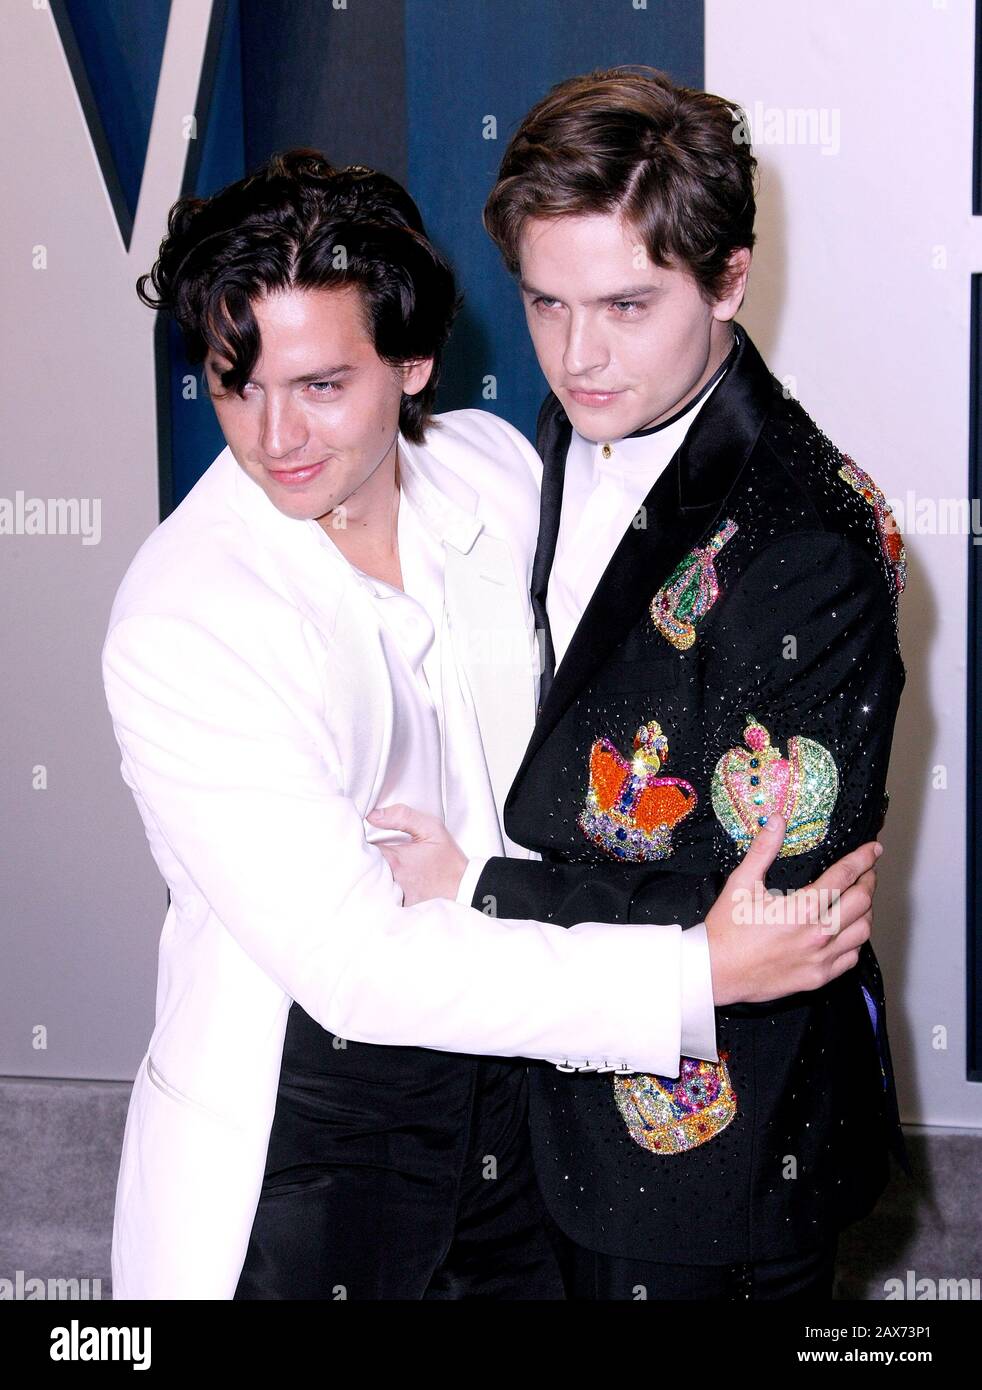 Beverly Hills, USA. 09th Feb, 2020. BEVERLY HILLS, CALIFORNIA - FEBRUARY 9: Cole Sprouse, Dylan Sprouse attend the 2020 Vanity Fair Oscar Party at Wallis Annenberg Center for the Performing Arts on February 9, 2020 in Beverly Hills, California. Photo: CraSH/imageSPACE Credit: Imagespace/Alamy Live News Stock Photo